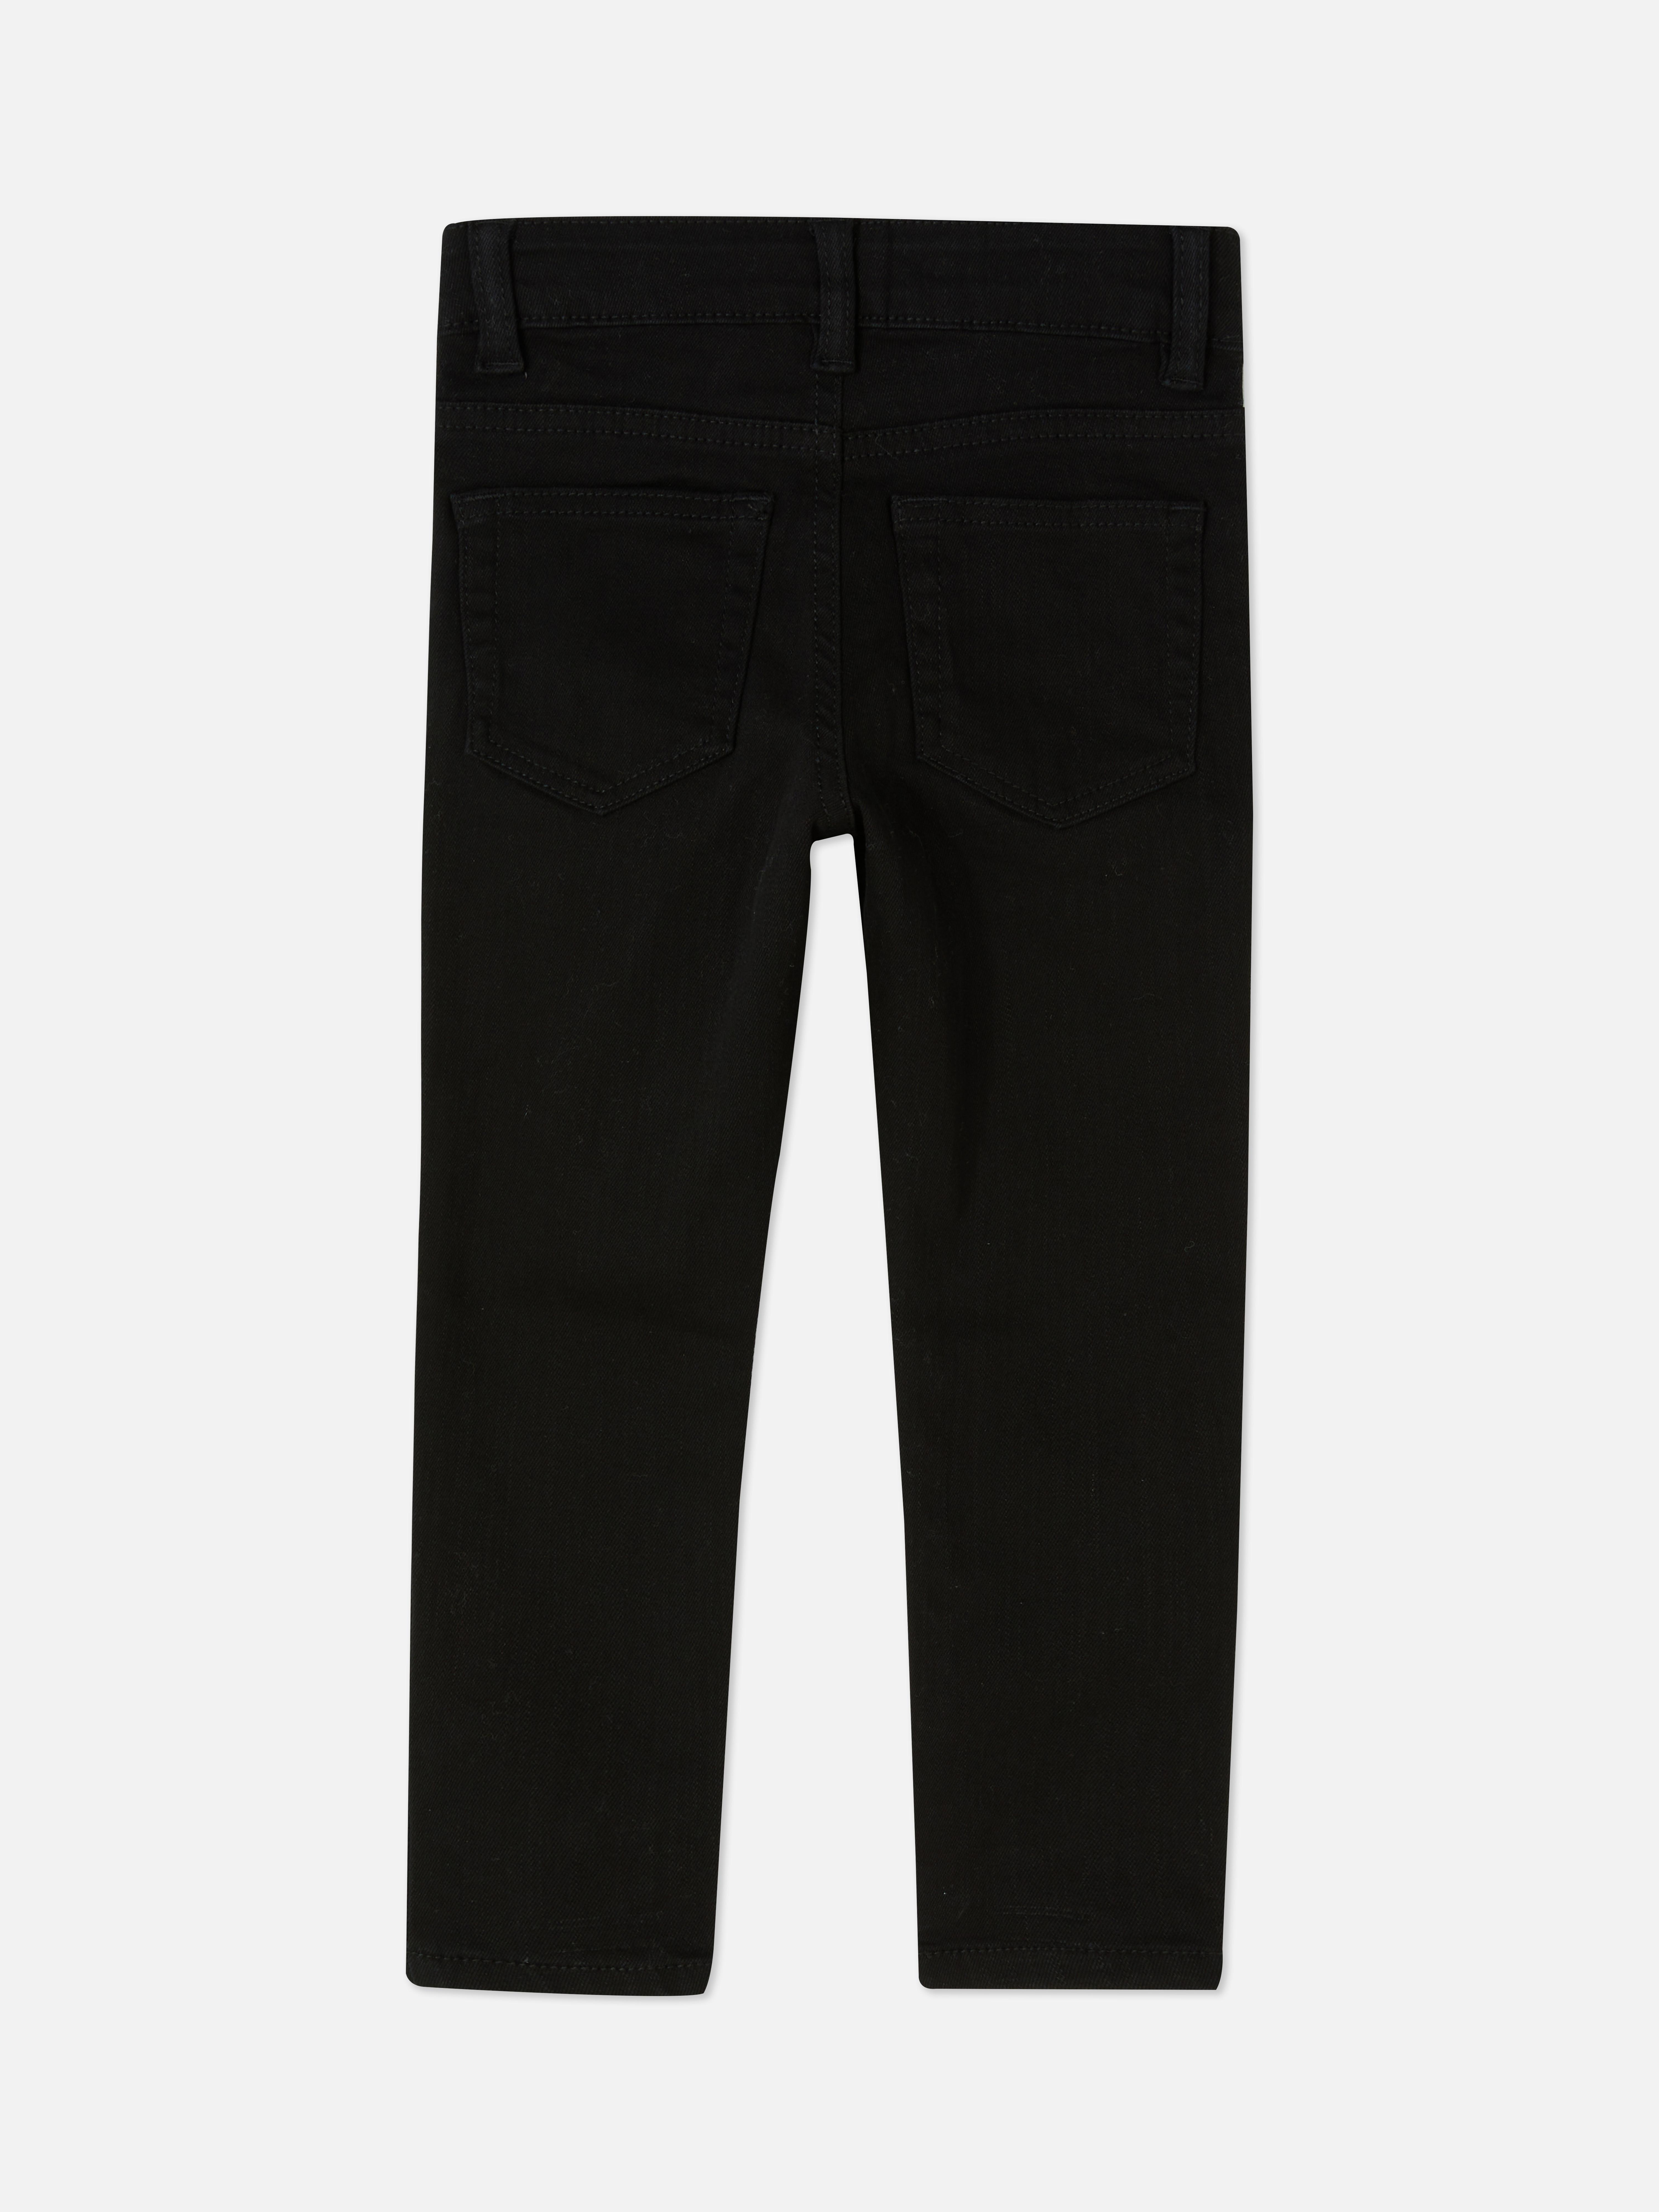 Cotton Twill Jeans